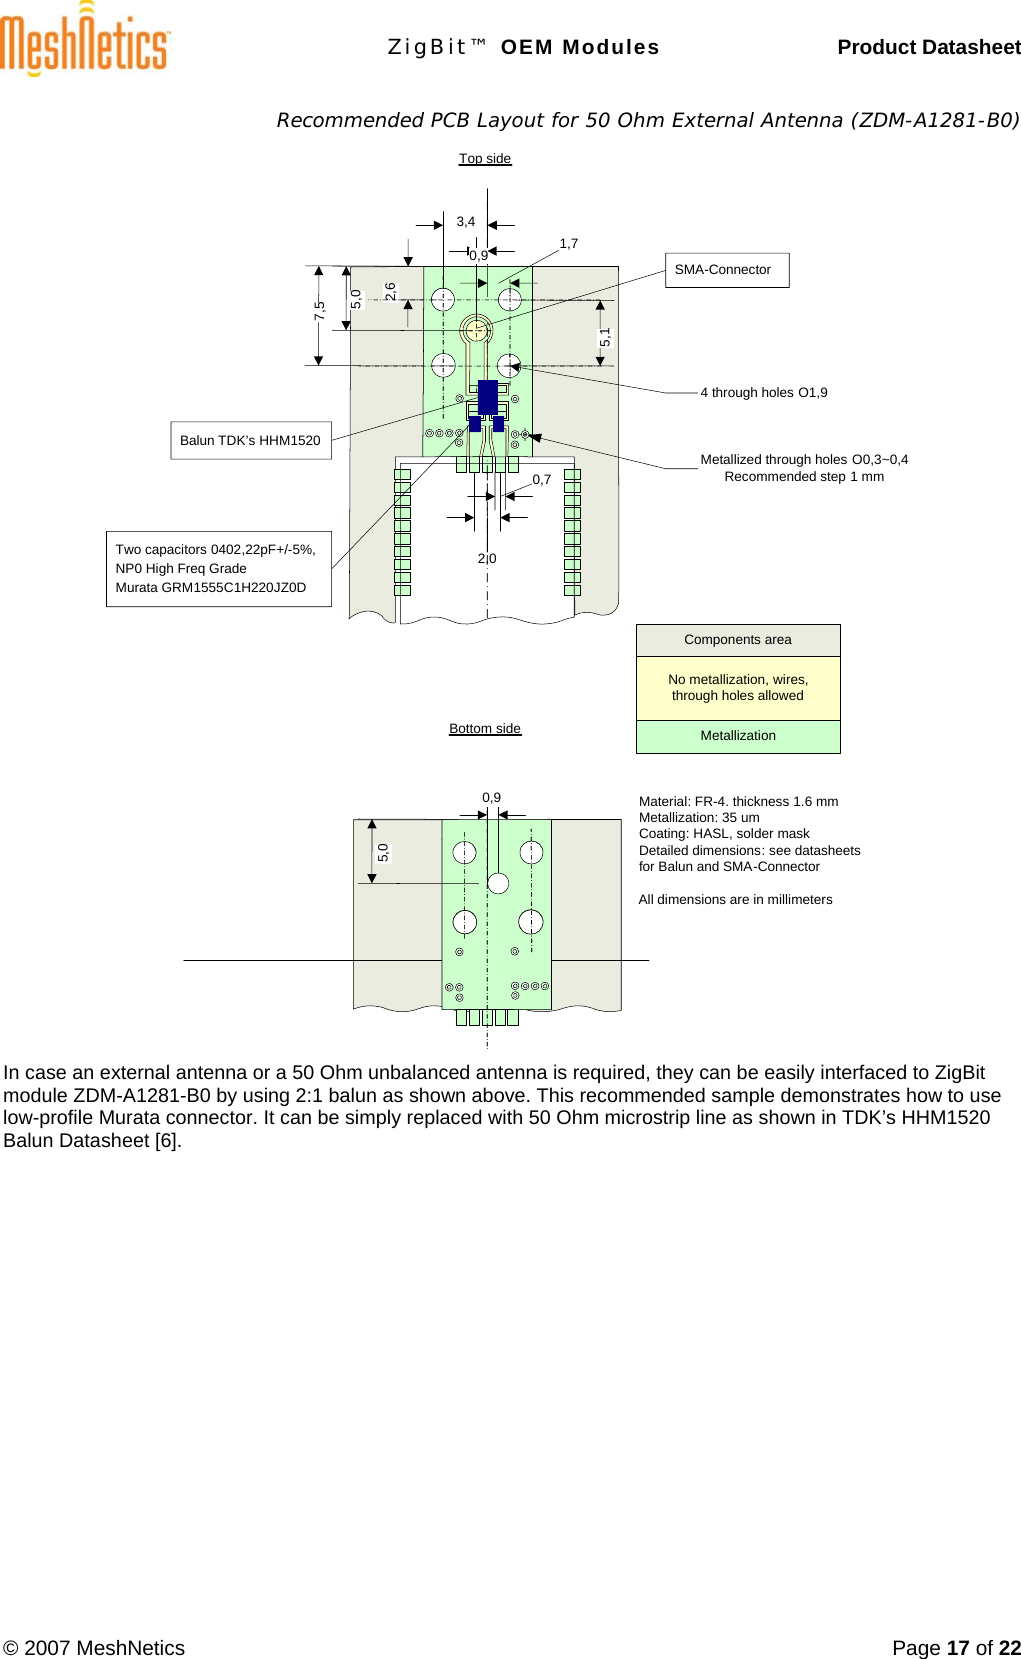 ZigBit™ OEM Modules     Product Datasheet  © 2007 MeshNetics  Page 17 of 22  Recommended PCB Layout for 50 Ohm External Antenna (ZDM-A1281-B0) Material: FR-4. thickness 1.6 mmMetallization: 35 umCoating: HASL, solder maskDetailed dimensions: see datasheets for Balun and SMA-ConnectorNo metallization, wires, through holes allowedMetallizationComponents areaTop sideBottom sideAll dimensions are in millimeters2,07,52,60,71,75,1Balun TDK’s HHM1520SMA-ConnectorMetallized through holes O0,3~0,4Recommended step 1 mm0,93,45,00,95,04 through holes O1,9Two capacitors 0402,22pF+/-5%, NP0 High Freq GradeMurata GRM1555C1H220JZ0D In case an external antenna or a 50 Ohm unbalanced antenna is required, they can be easily interfaced to ZigBit module ZDM-A1281-B0 by using 2:1 balun as shown above. This recommended sample demonstrates how to use low-profile Murata connector. It can be simply replaced with 50 Ohm microstrip line as shown in TDK’s HHM1520 Balun Datasheet [6].  